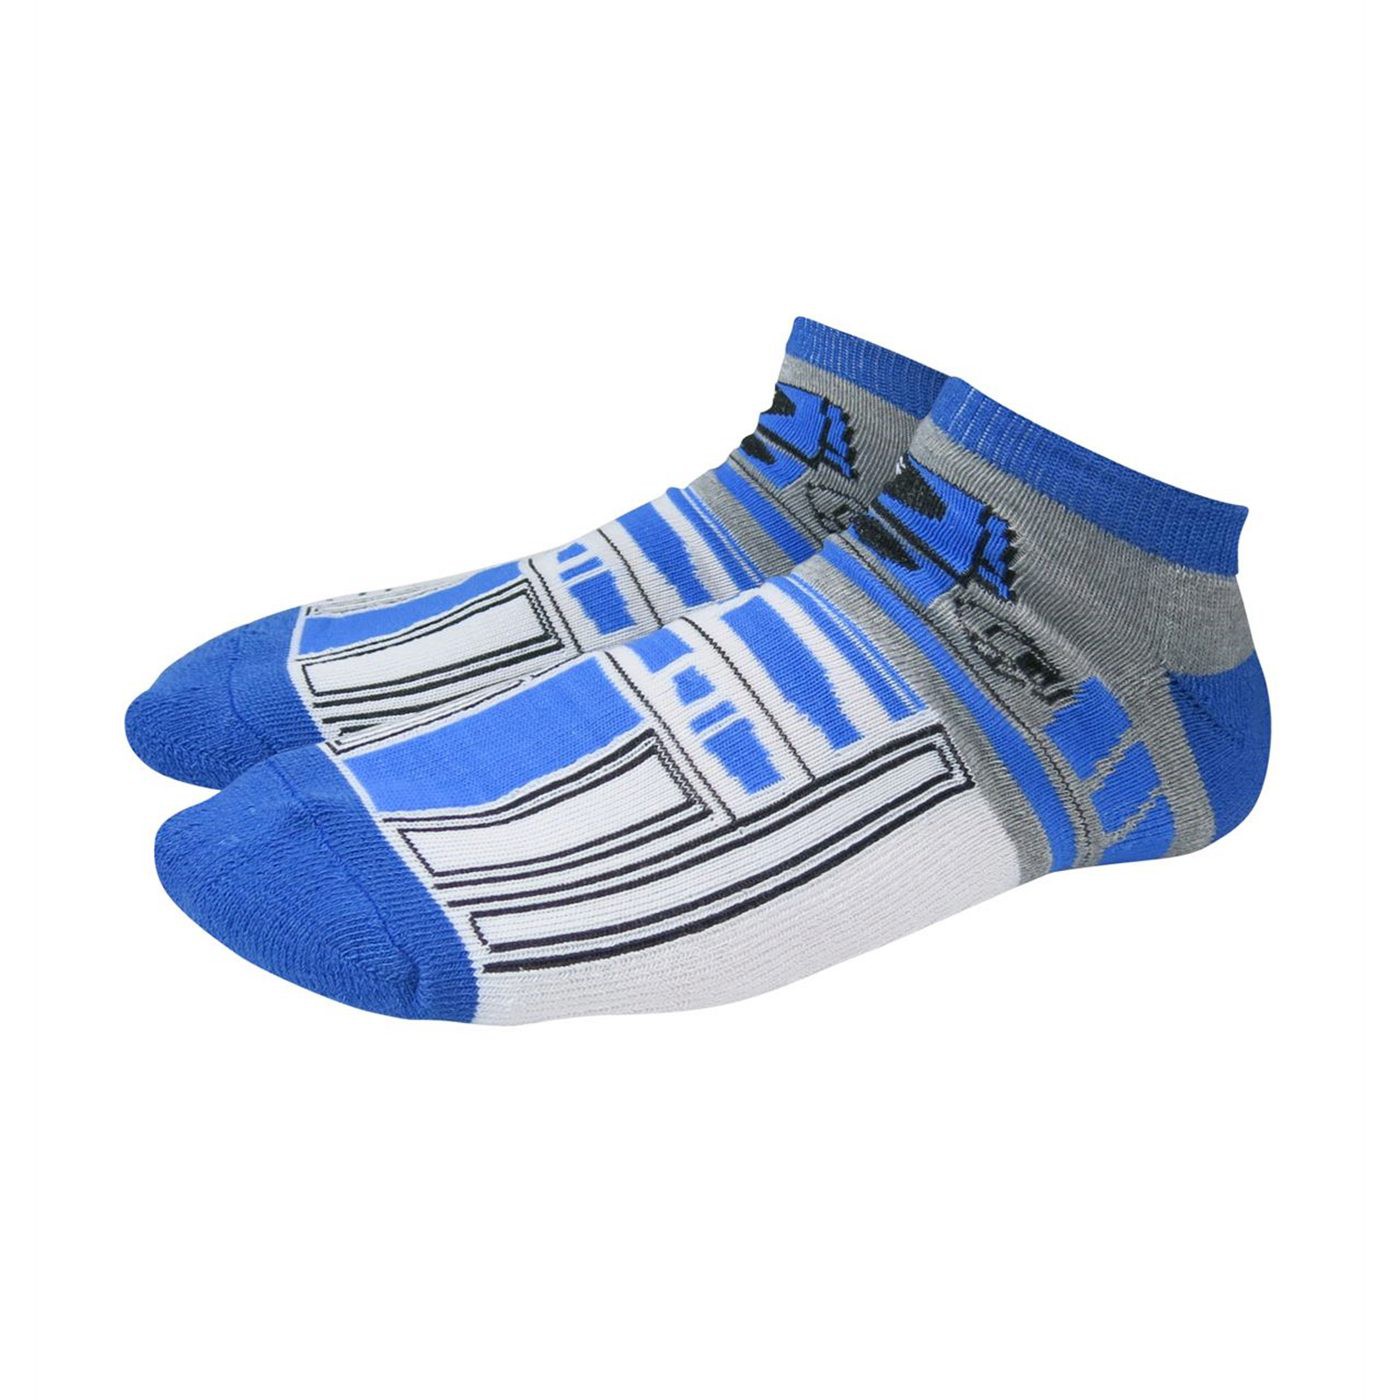 Star Wars BB-8 and R2-D2 Sock 3 Pack